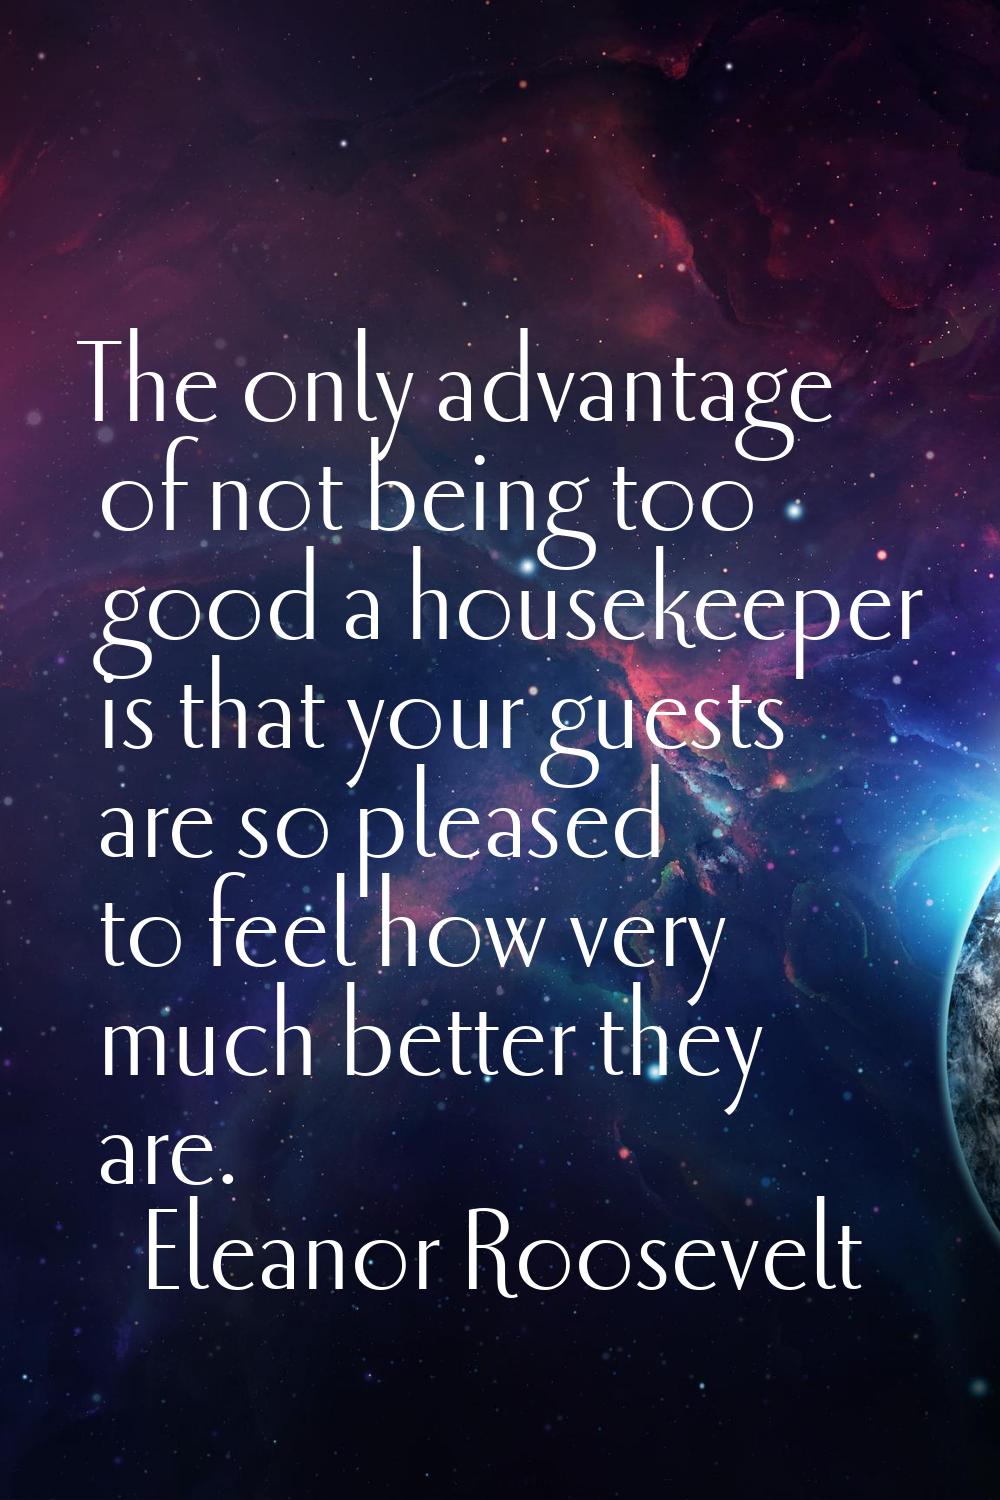 The only advantage of not being too good a housekeeper is that your guests are so pleased to feel h